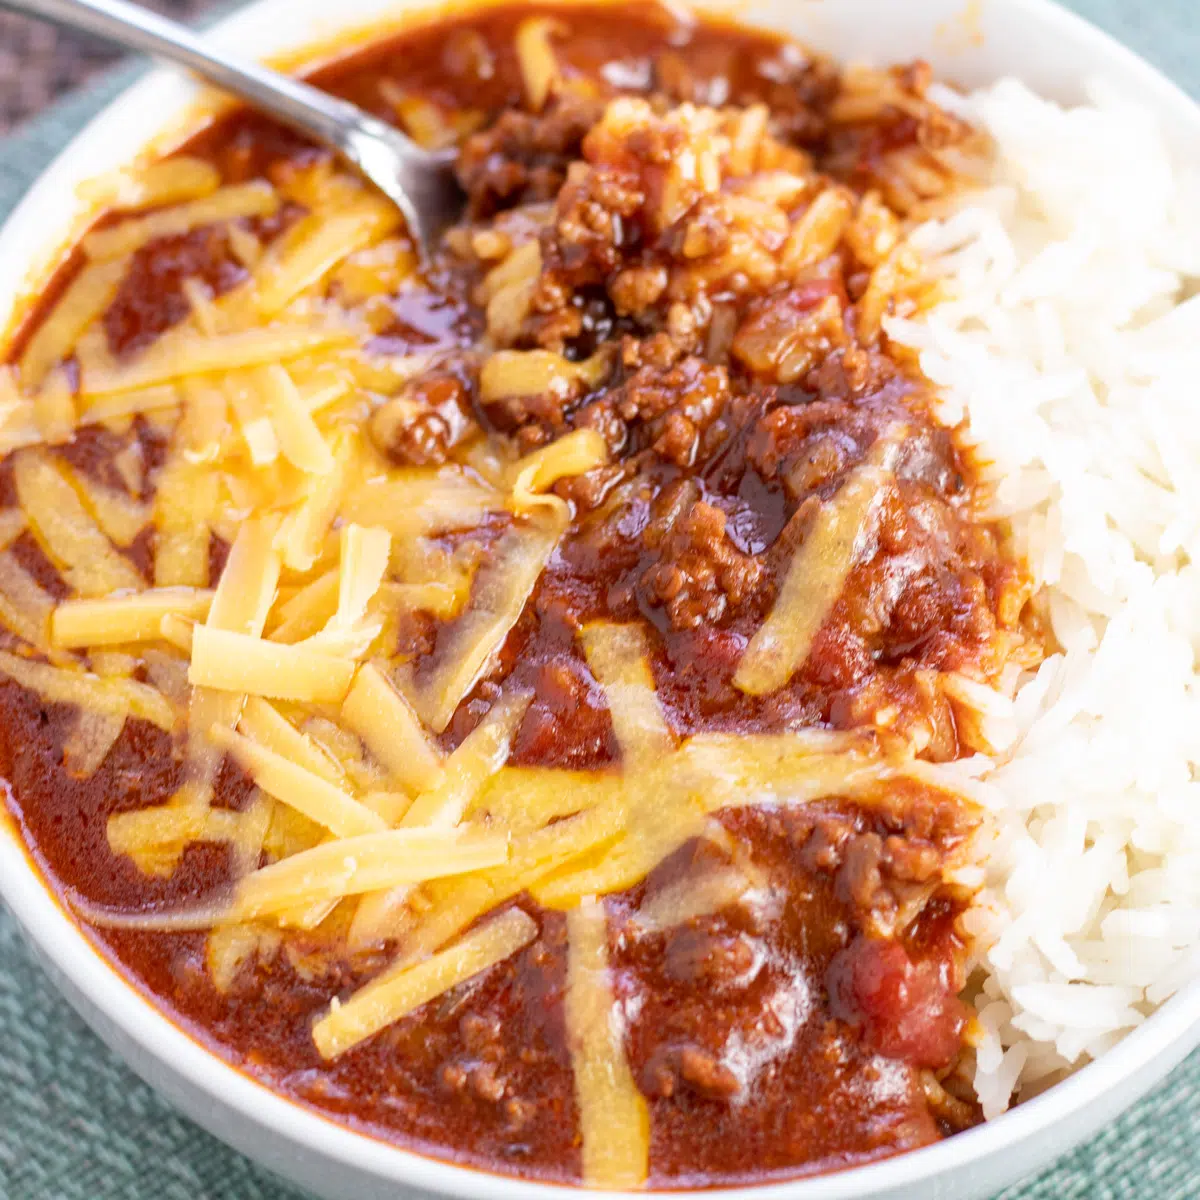 The best Texas Chili is made without beans and is shown here served with white rice.